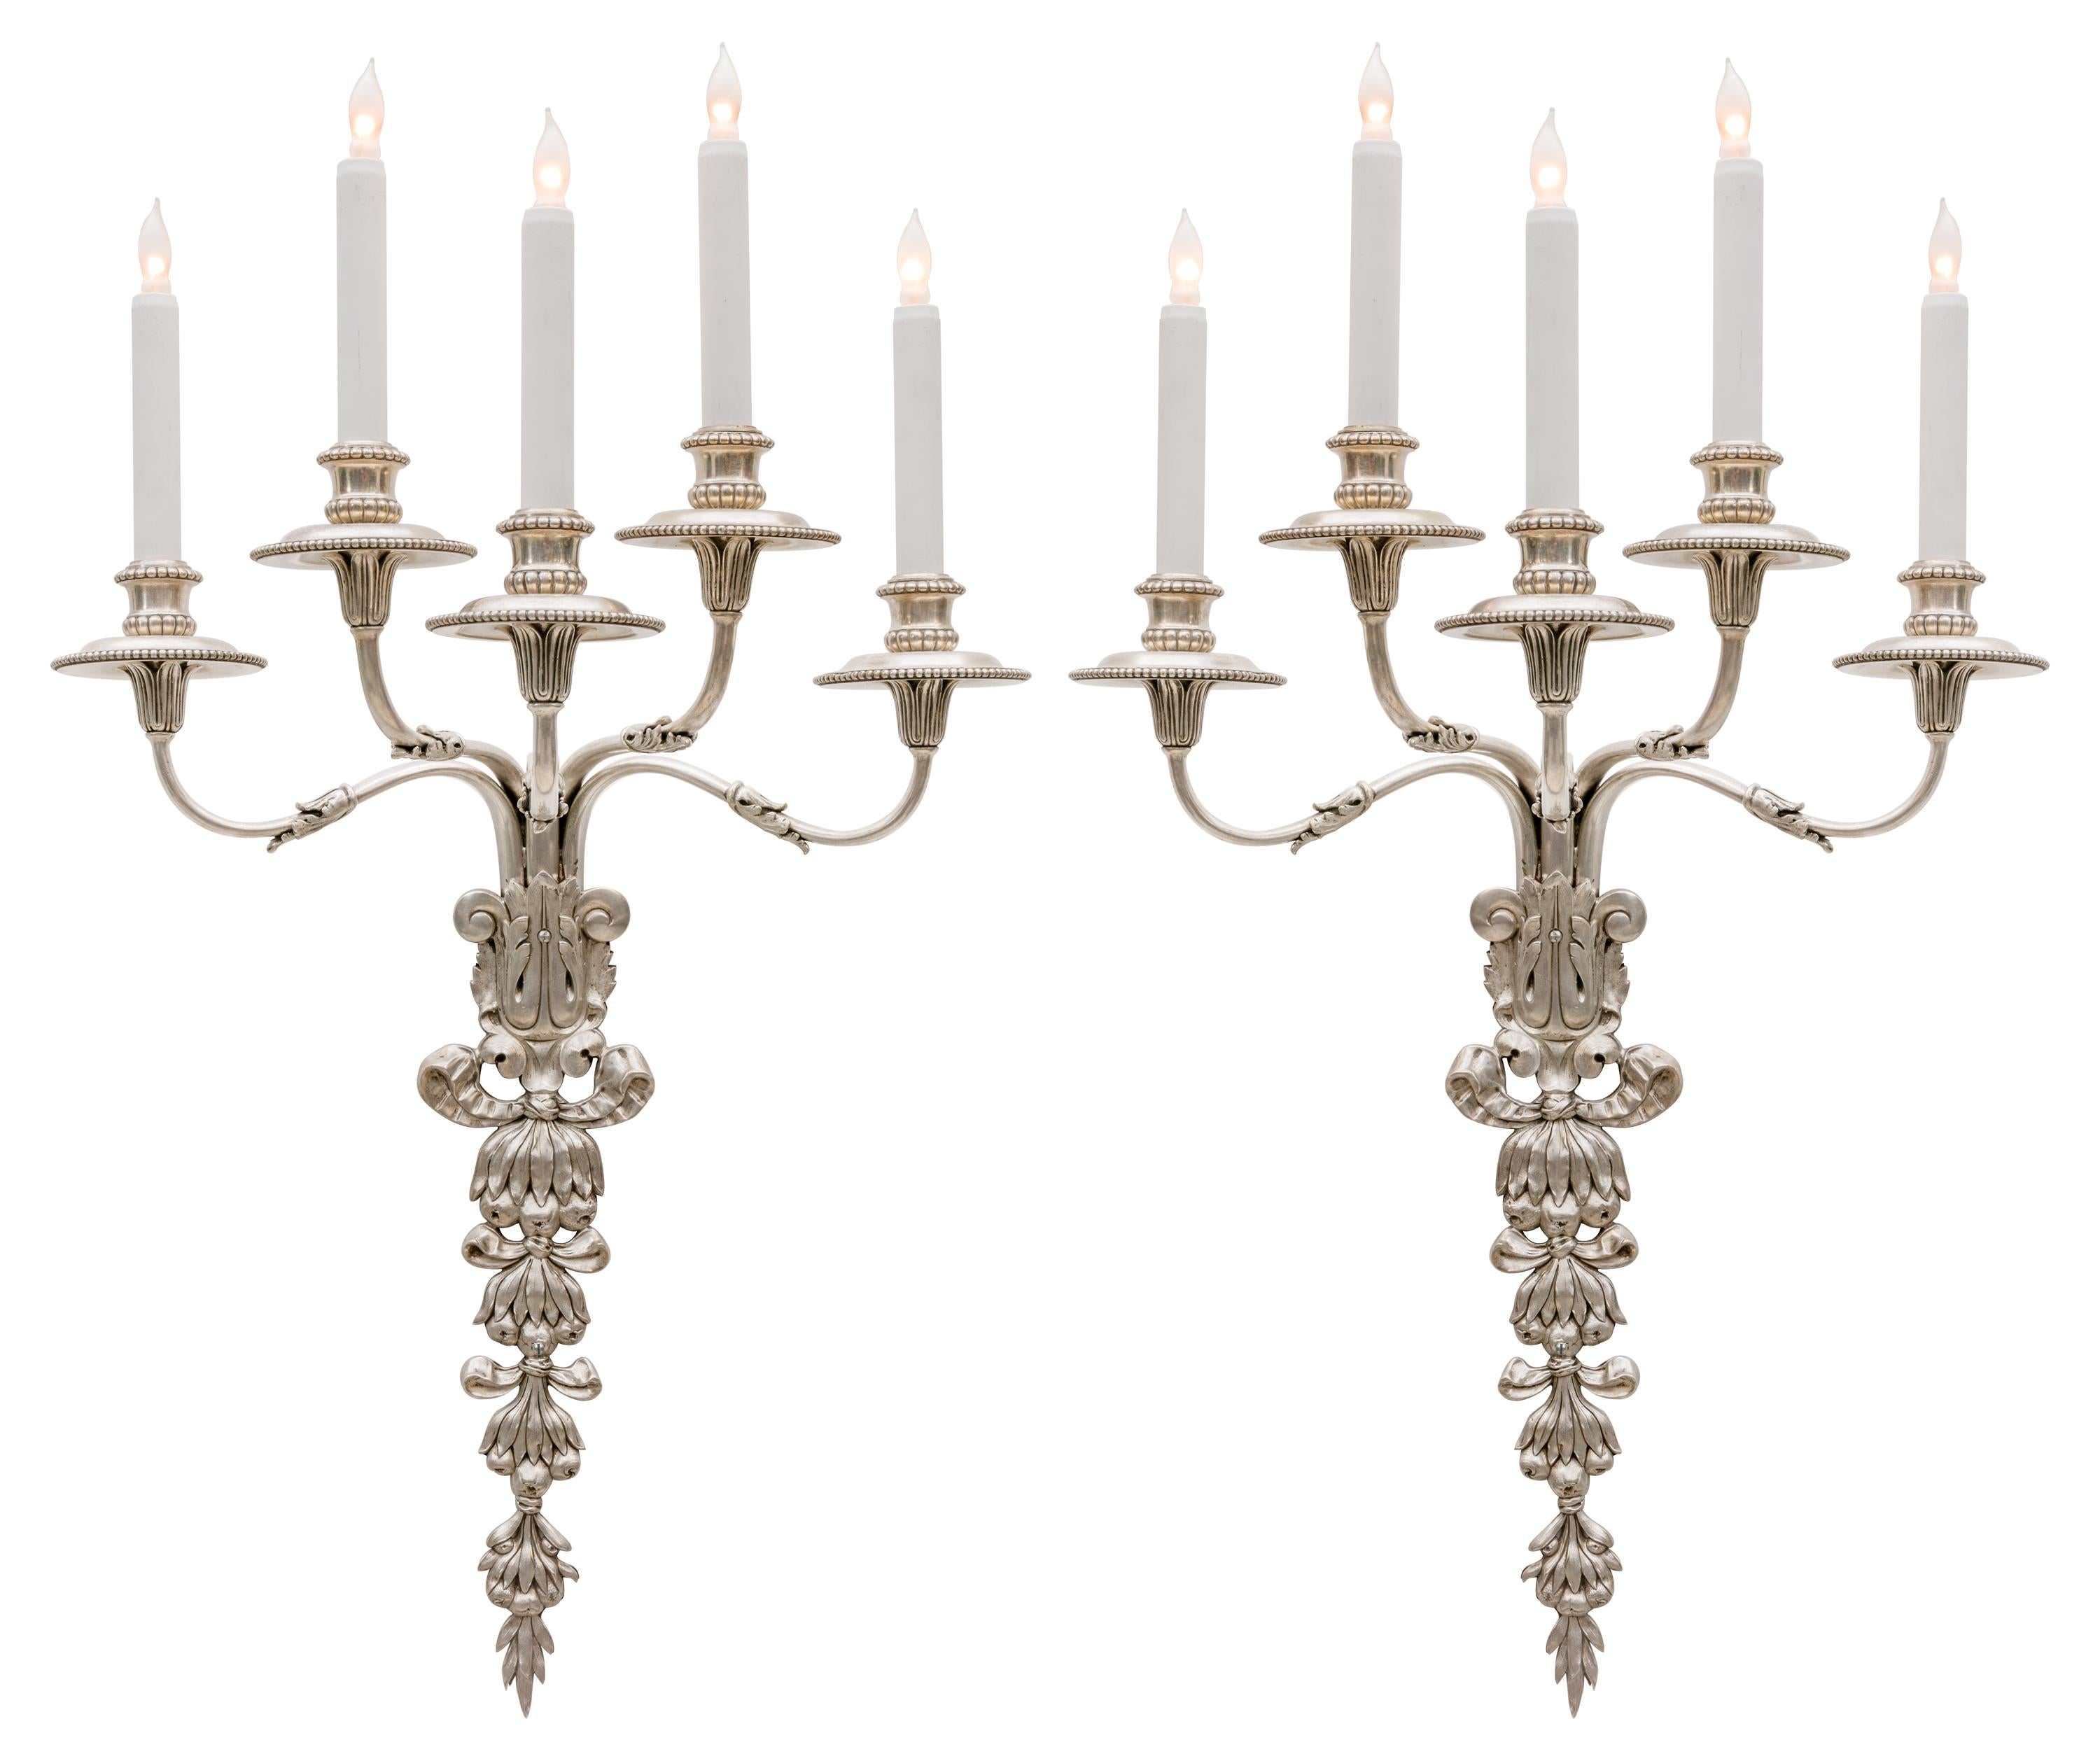 Edward F Caldwell & Co. Silvered Bronze Neoclassical Revival Sconces, USA 1900s For Sale